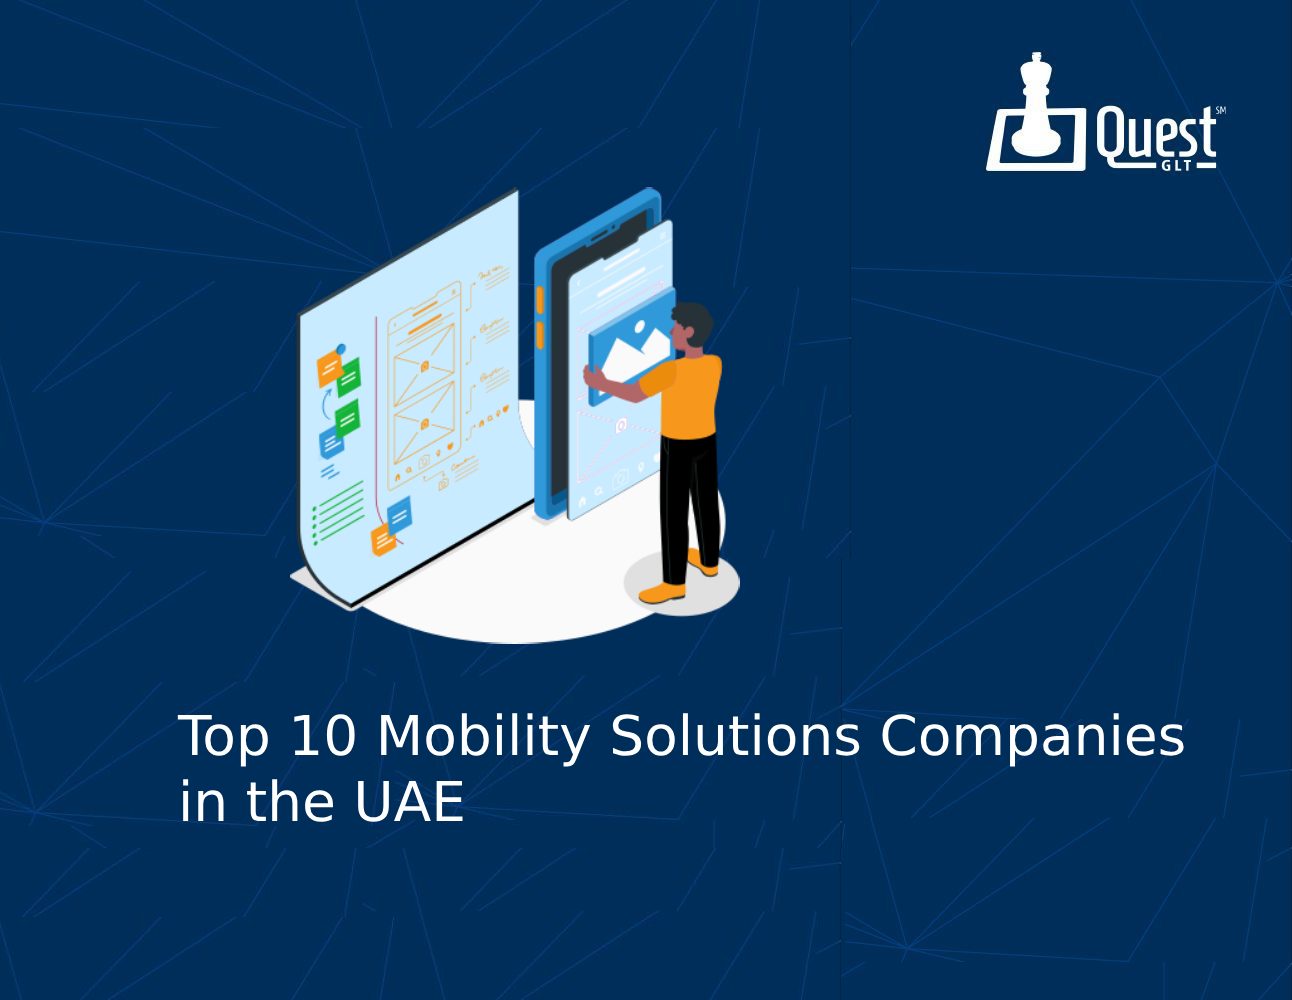 Top 10 Mobility Solutions Companies in UAE